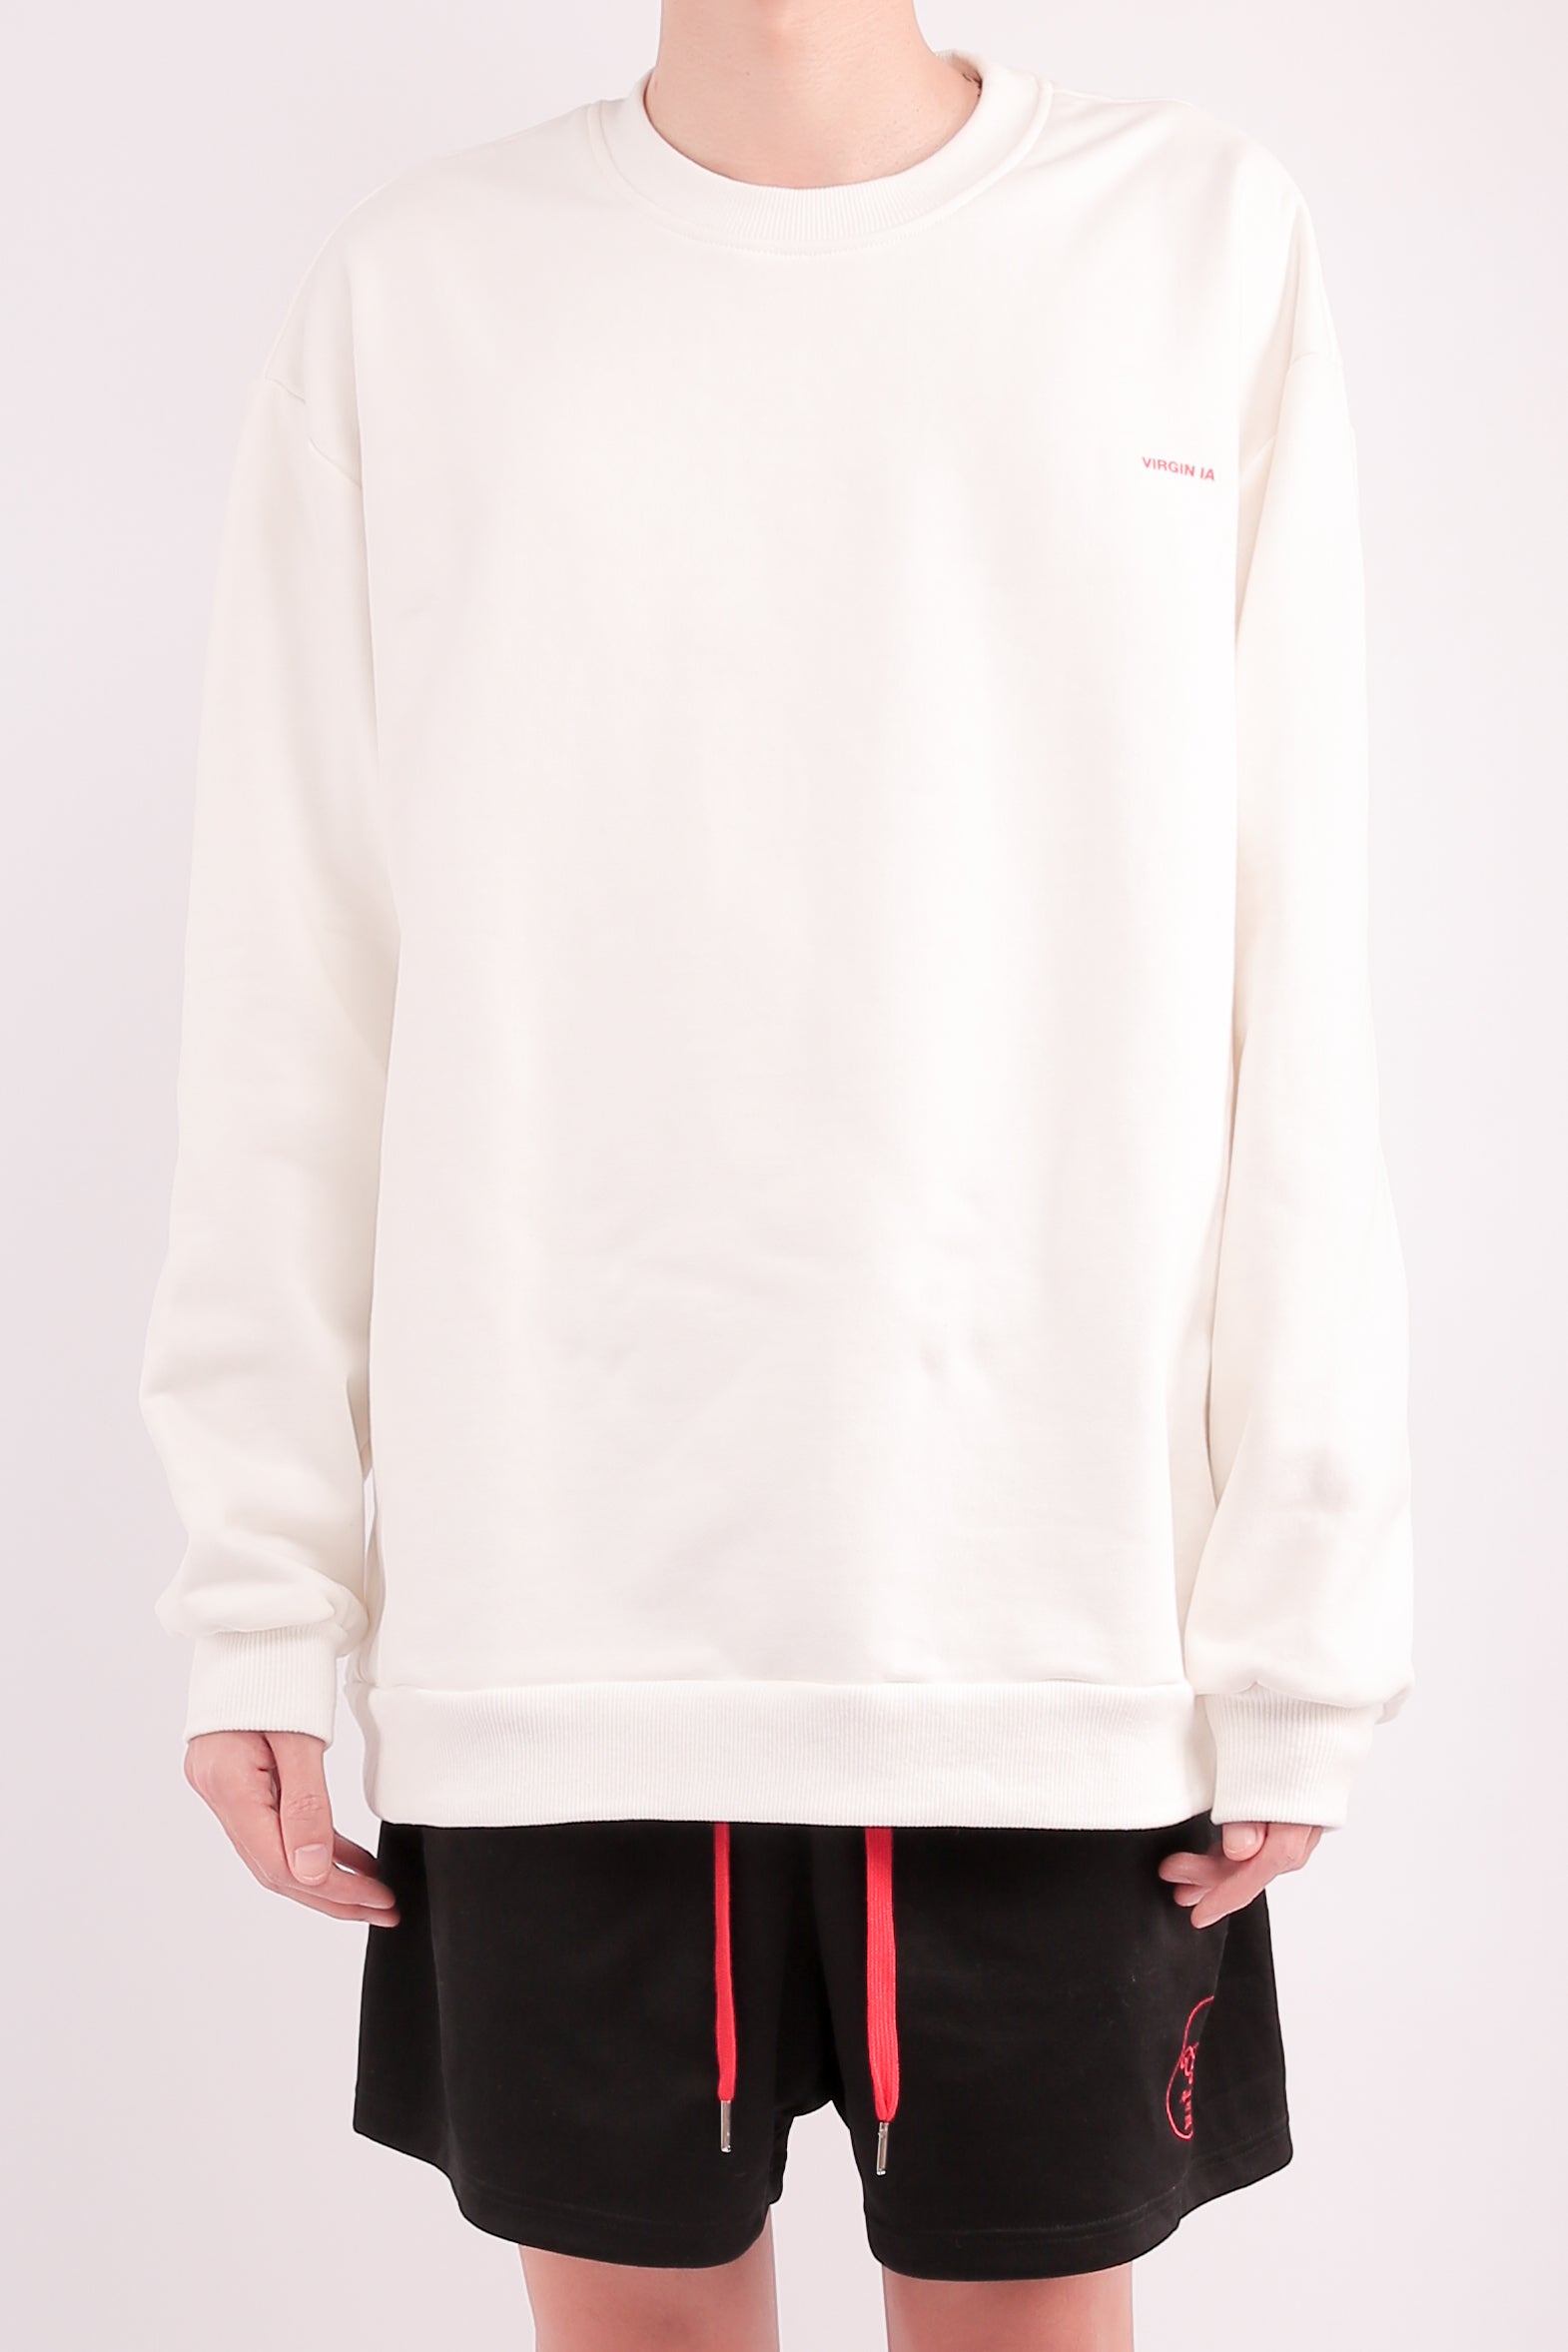 CHERRY DISCOTHEQUE - VIRGIN IA SWEATER IN OFF WHITE